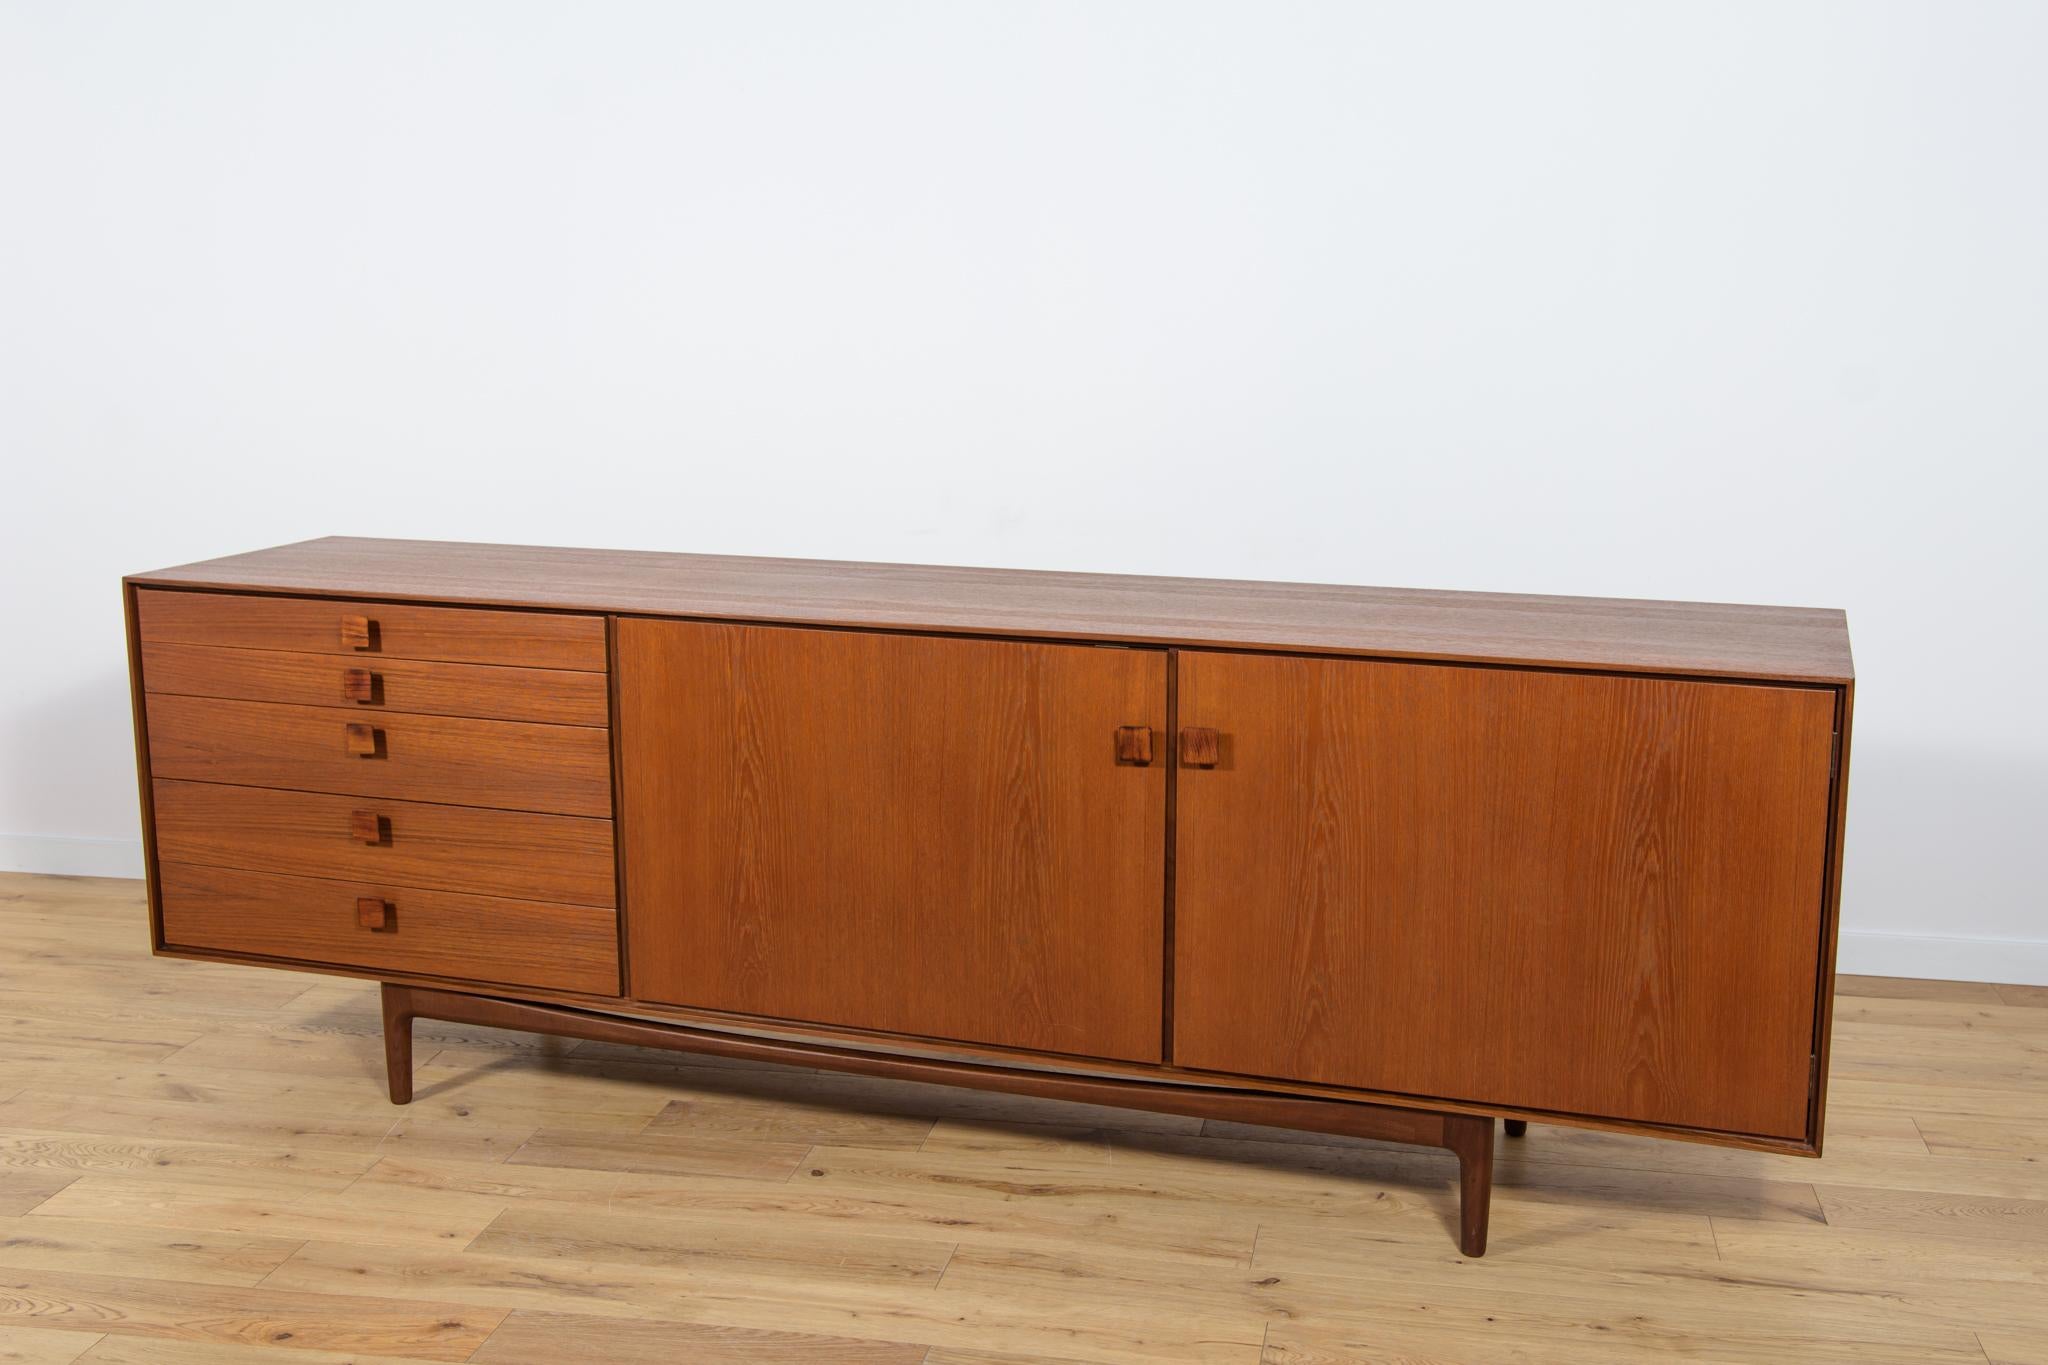 This magnificent mid-century Danish design sideboard credenza was designed by Ib Kofod-Larsen and manufactured by G-Plan circa 1960. It is made of African teak, handles made of rosewood. Features two doors as well as five drawers. Completely